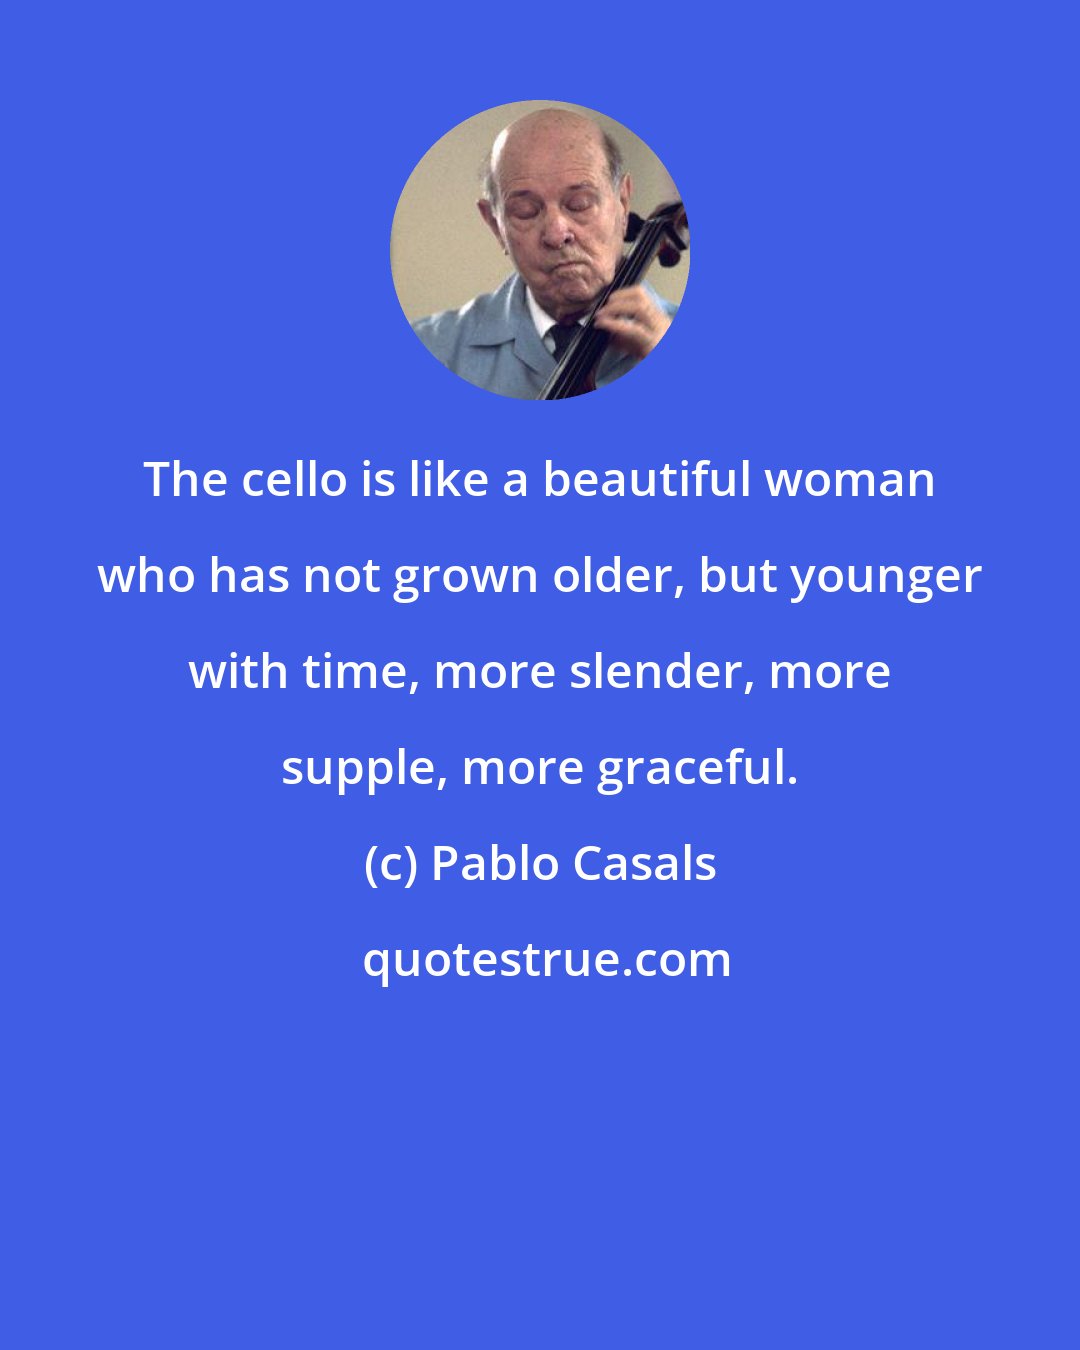 Pablo Casals: The cello is like a beautiful woman who has not grown older, but younger with time, more slender, more supple, more graceful.